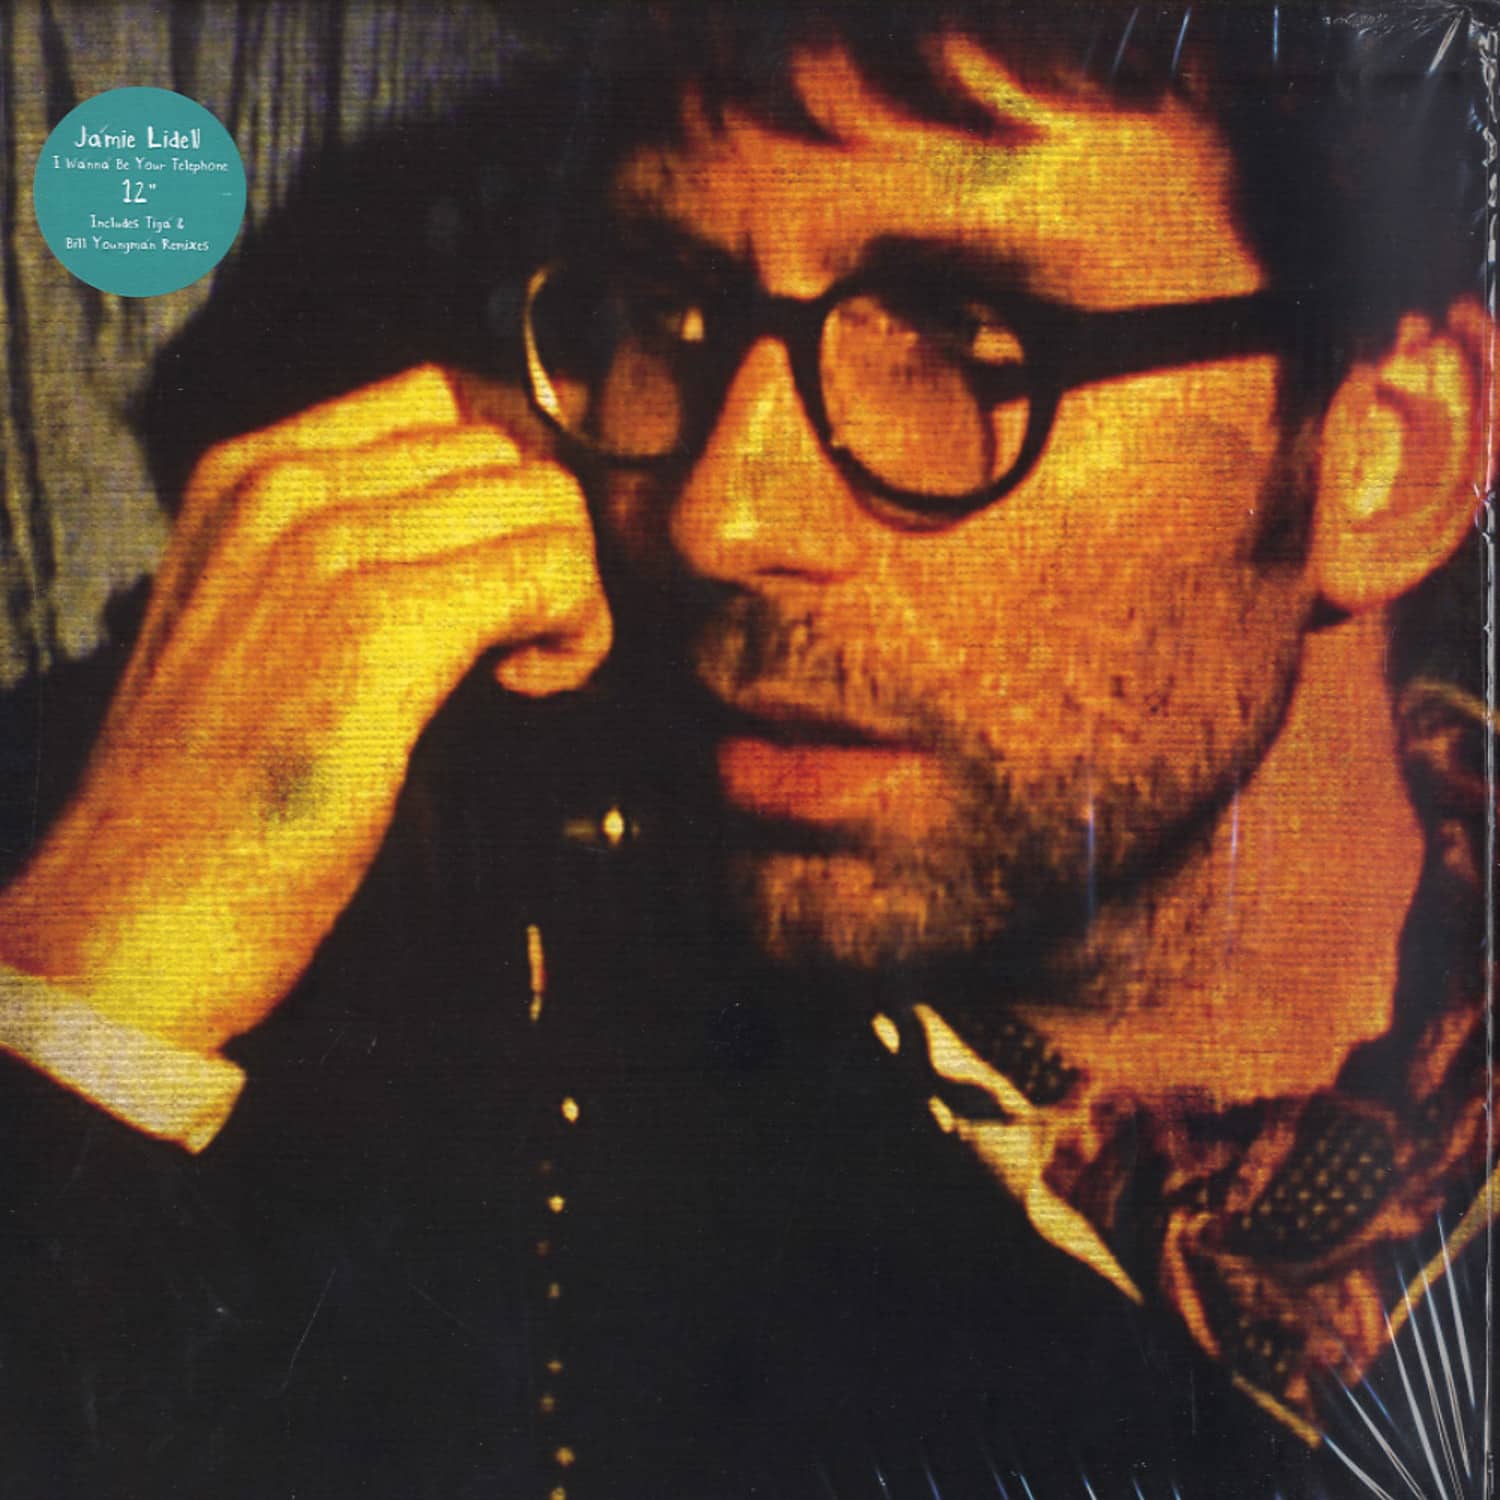 Jamie Lidell - I WANNA BE YOUR TELEPHONE 